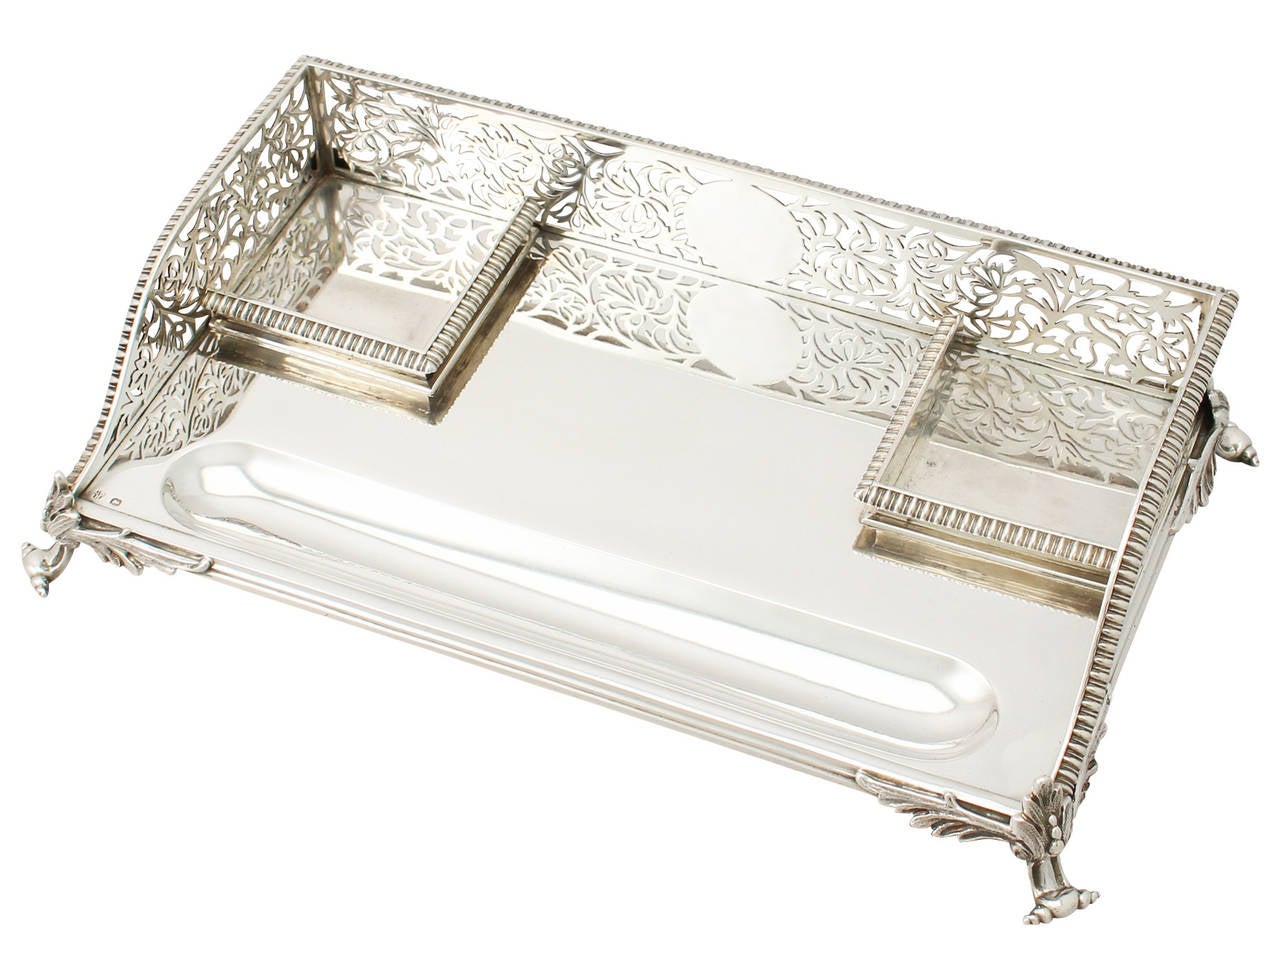 A fine and impressive antique Victorian English sterling silver and cut glass gallery desk standish; an addition to our ornamental office silverware collection.
This fine antique Victorian sterling silver gallery desk standish has a rectangular